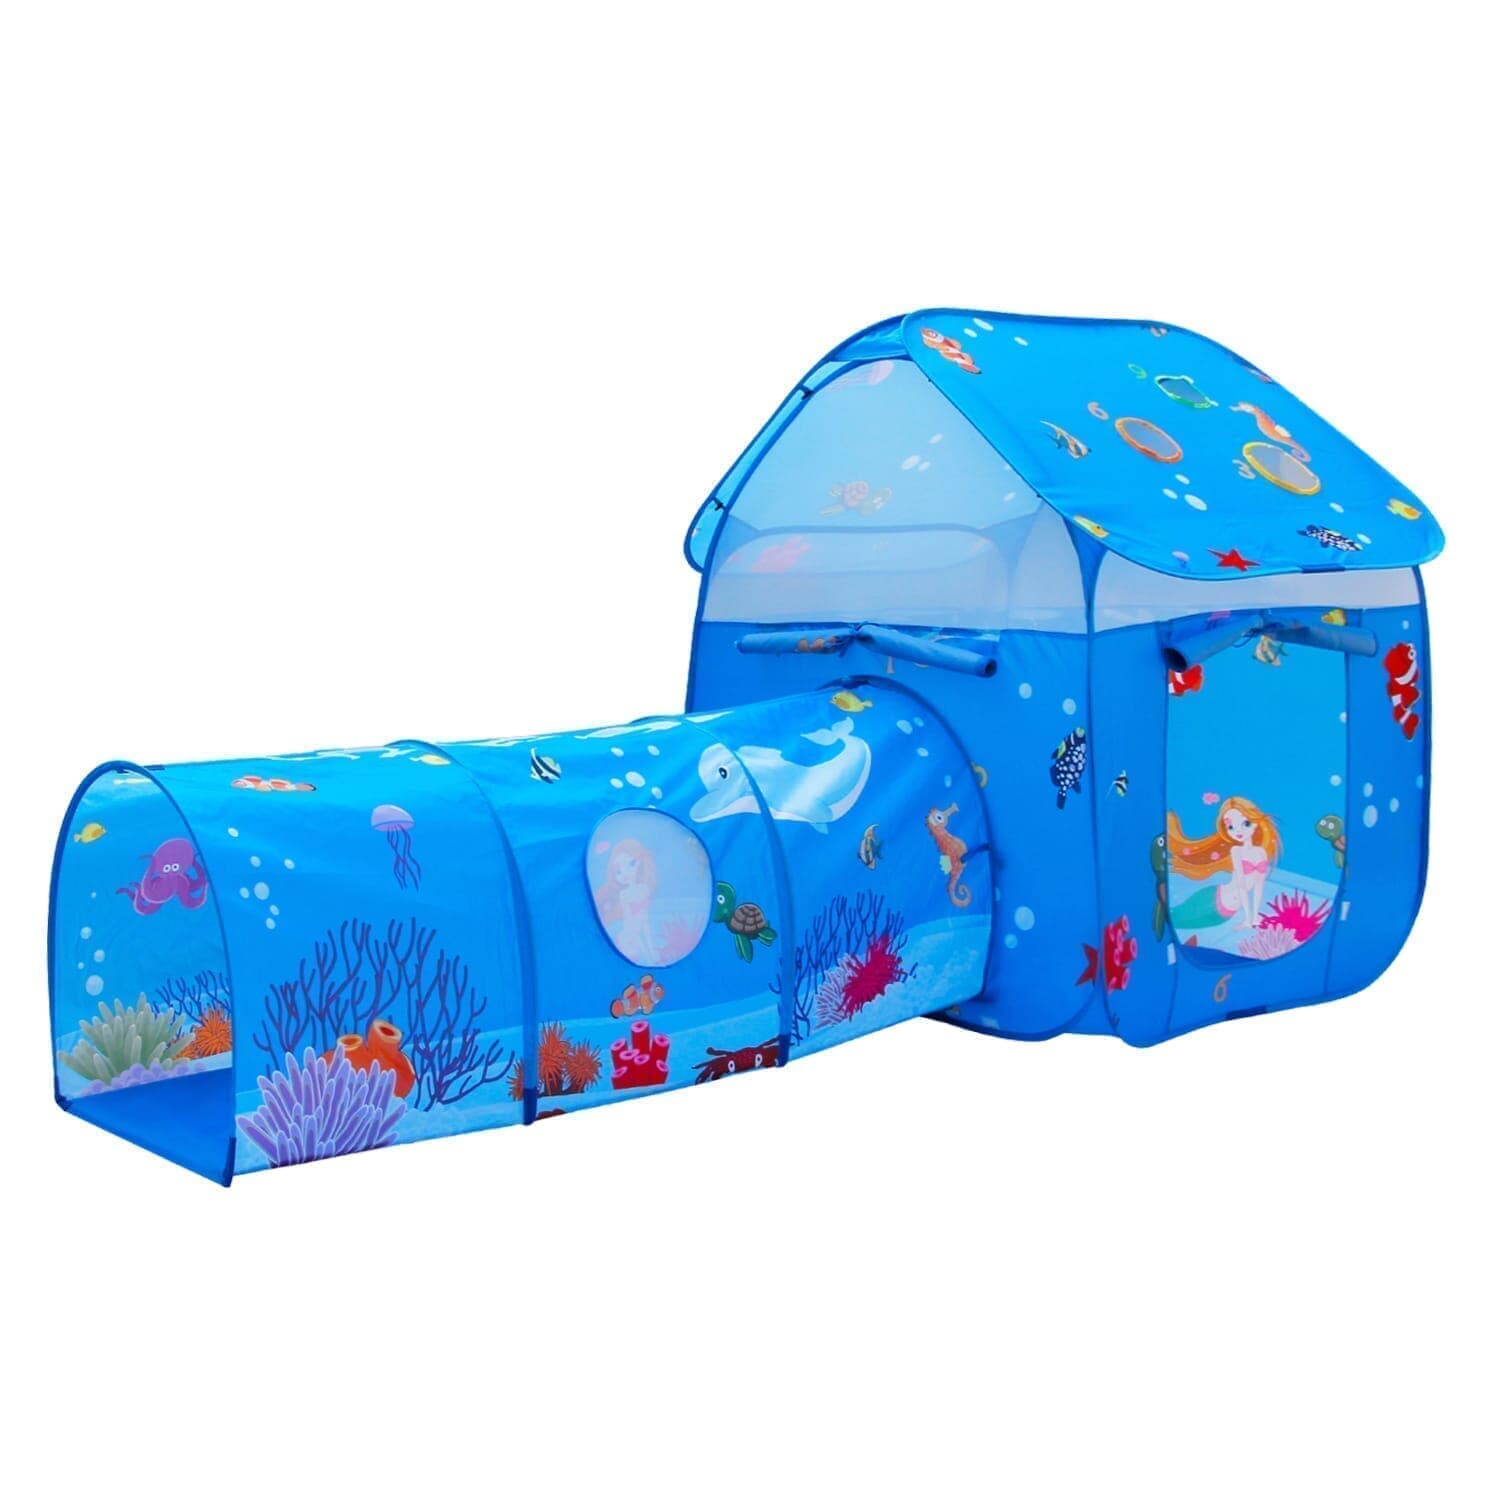 Homfu Play Tent for Kids Playhouse for Children Boys Popup Tent (Ocean Blue)  